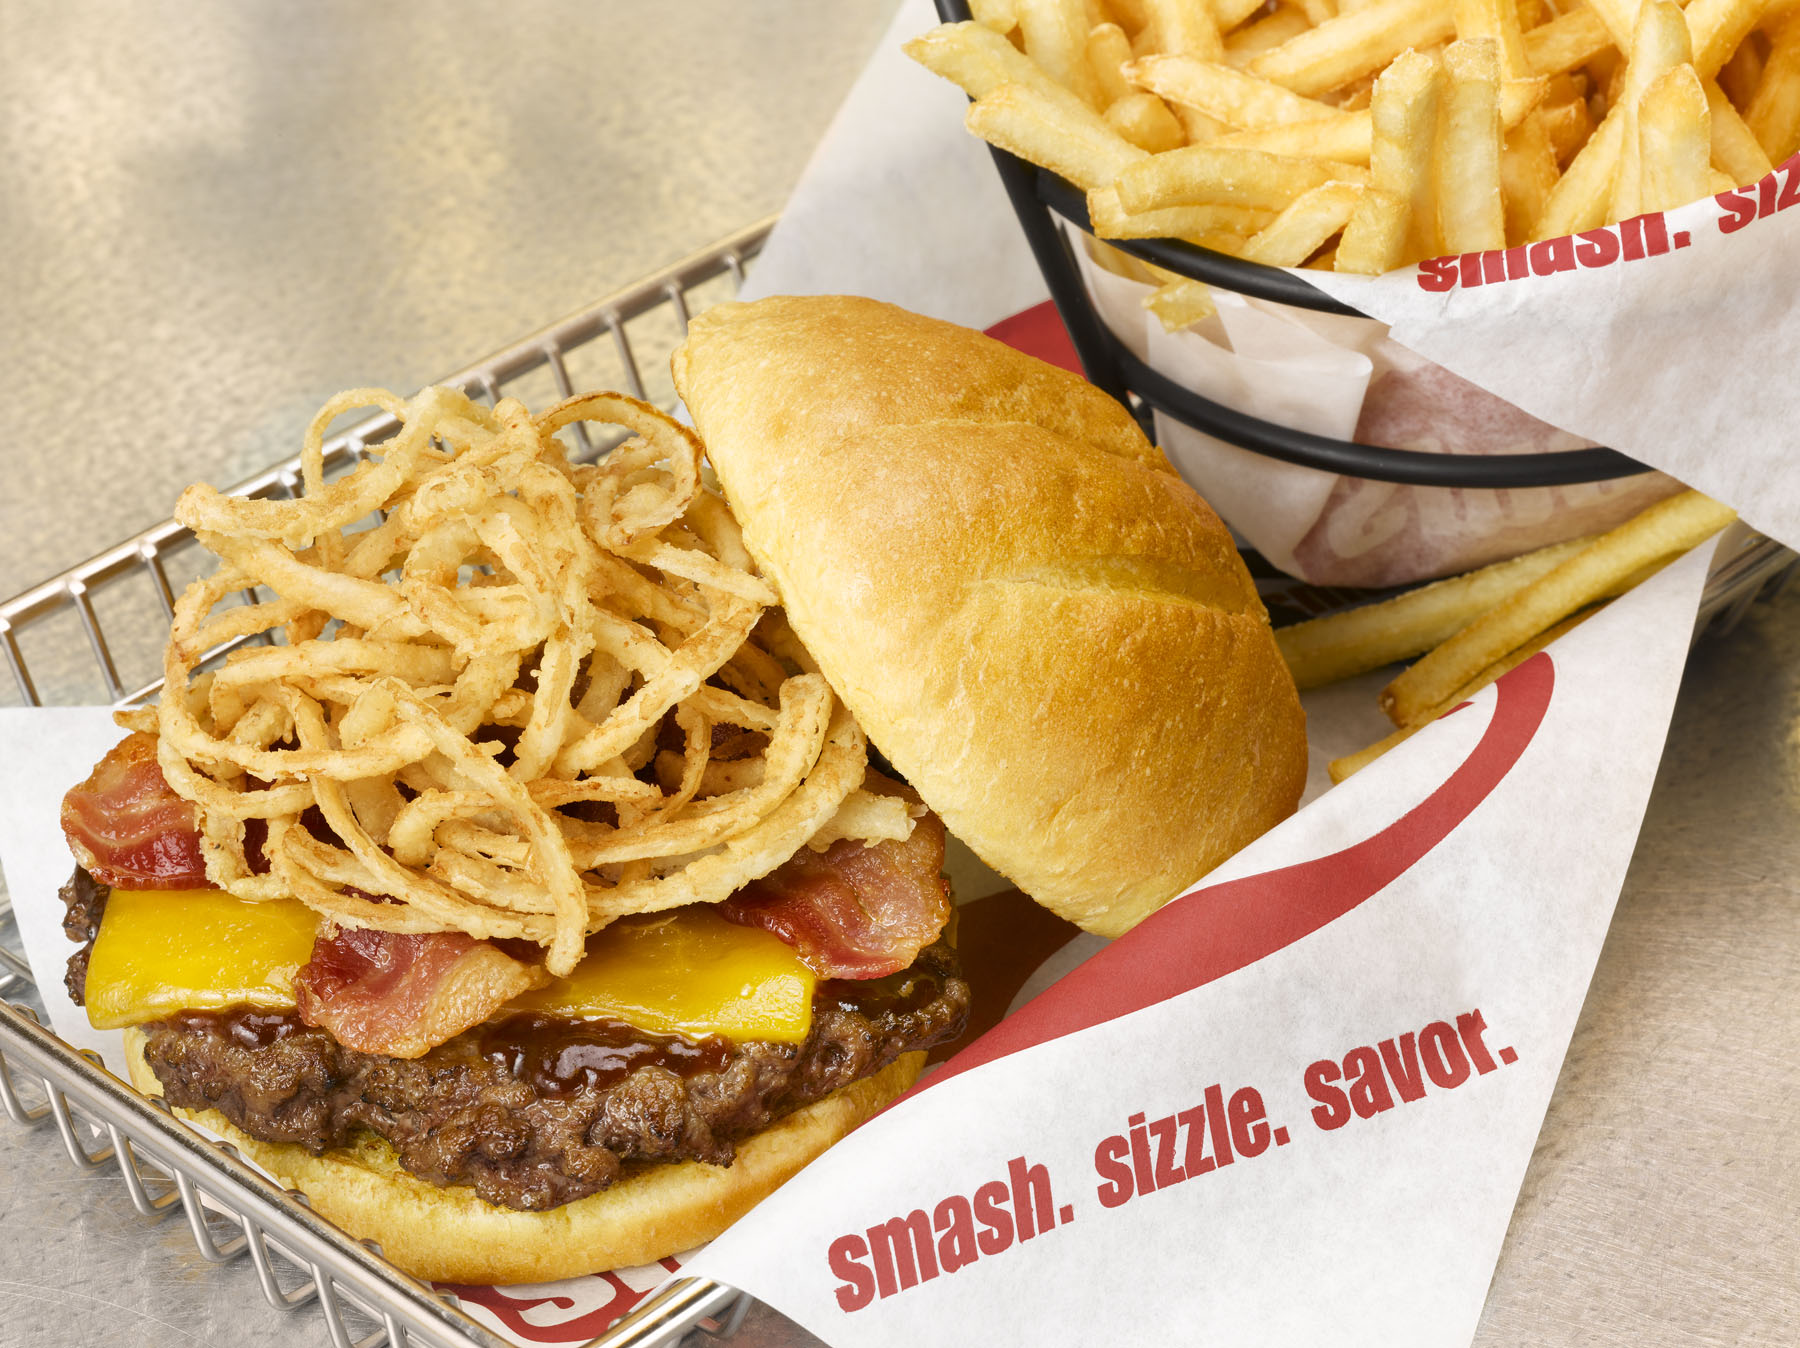 Win a sneak peek & dinner for 4 at the newest Smashburger ...